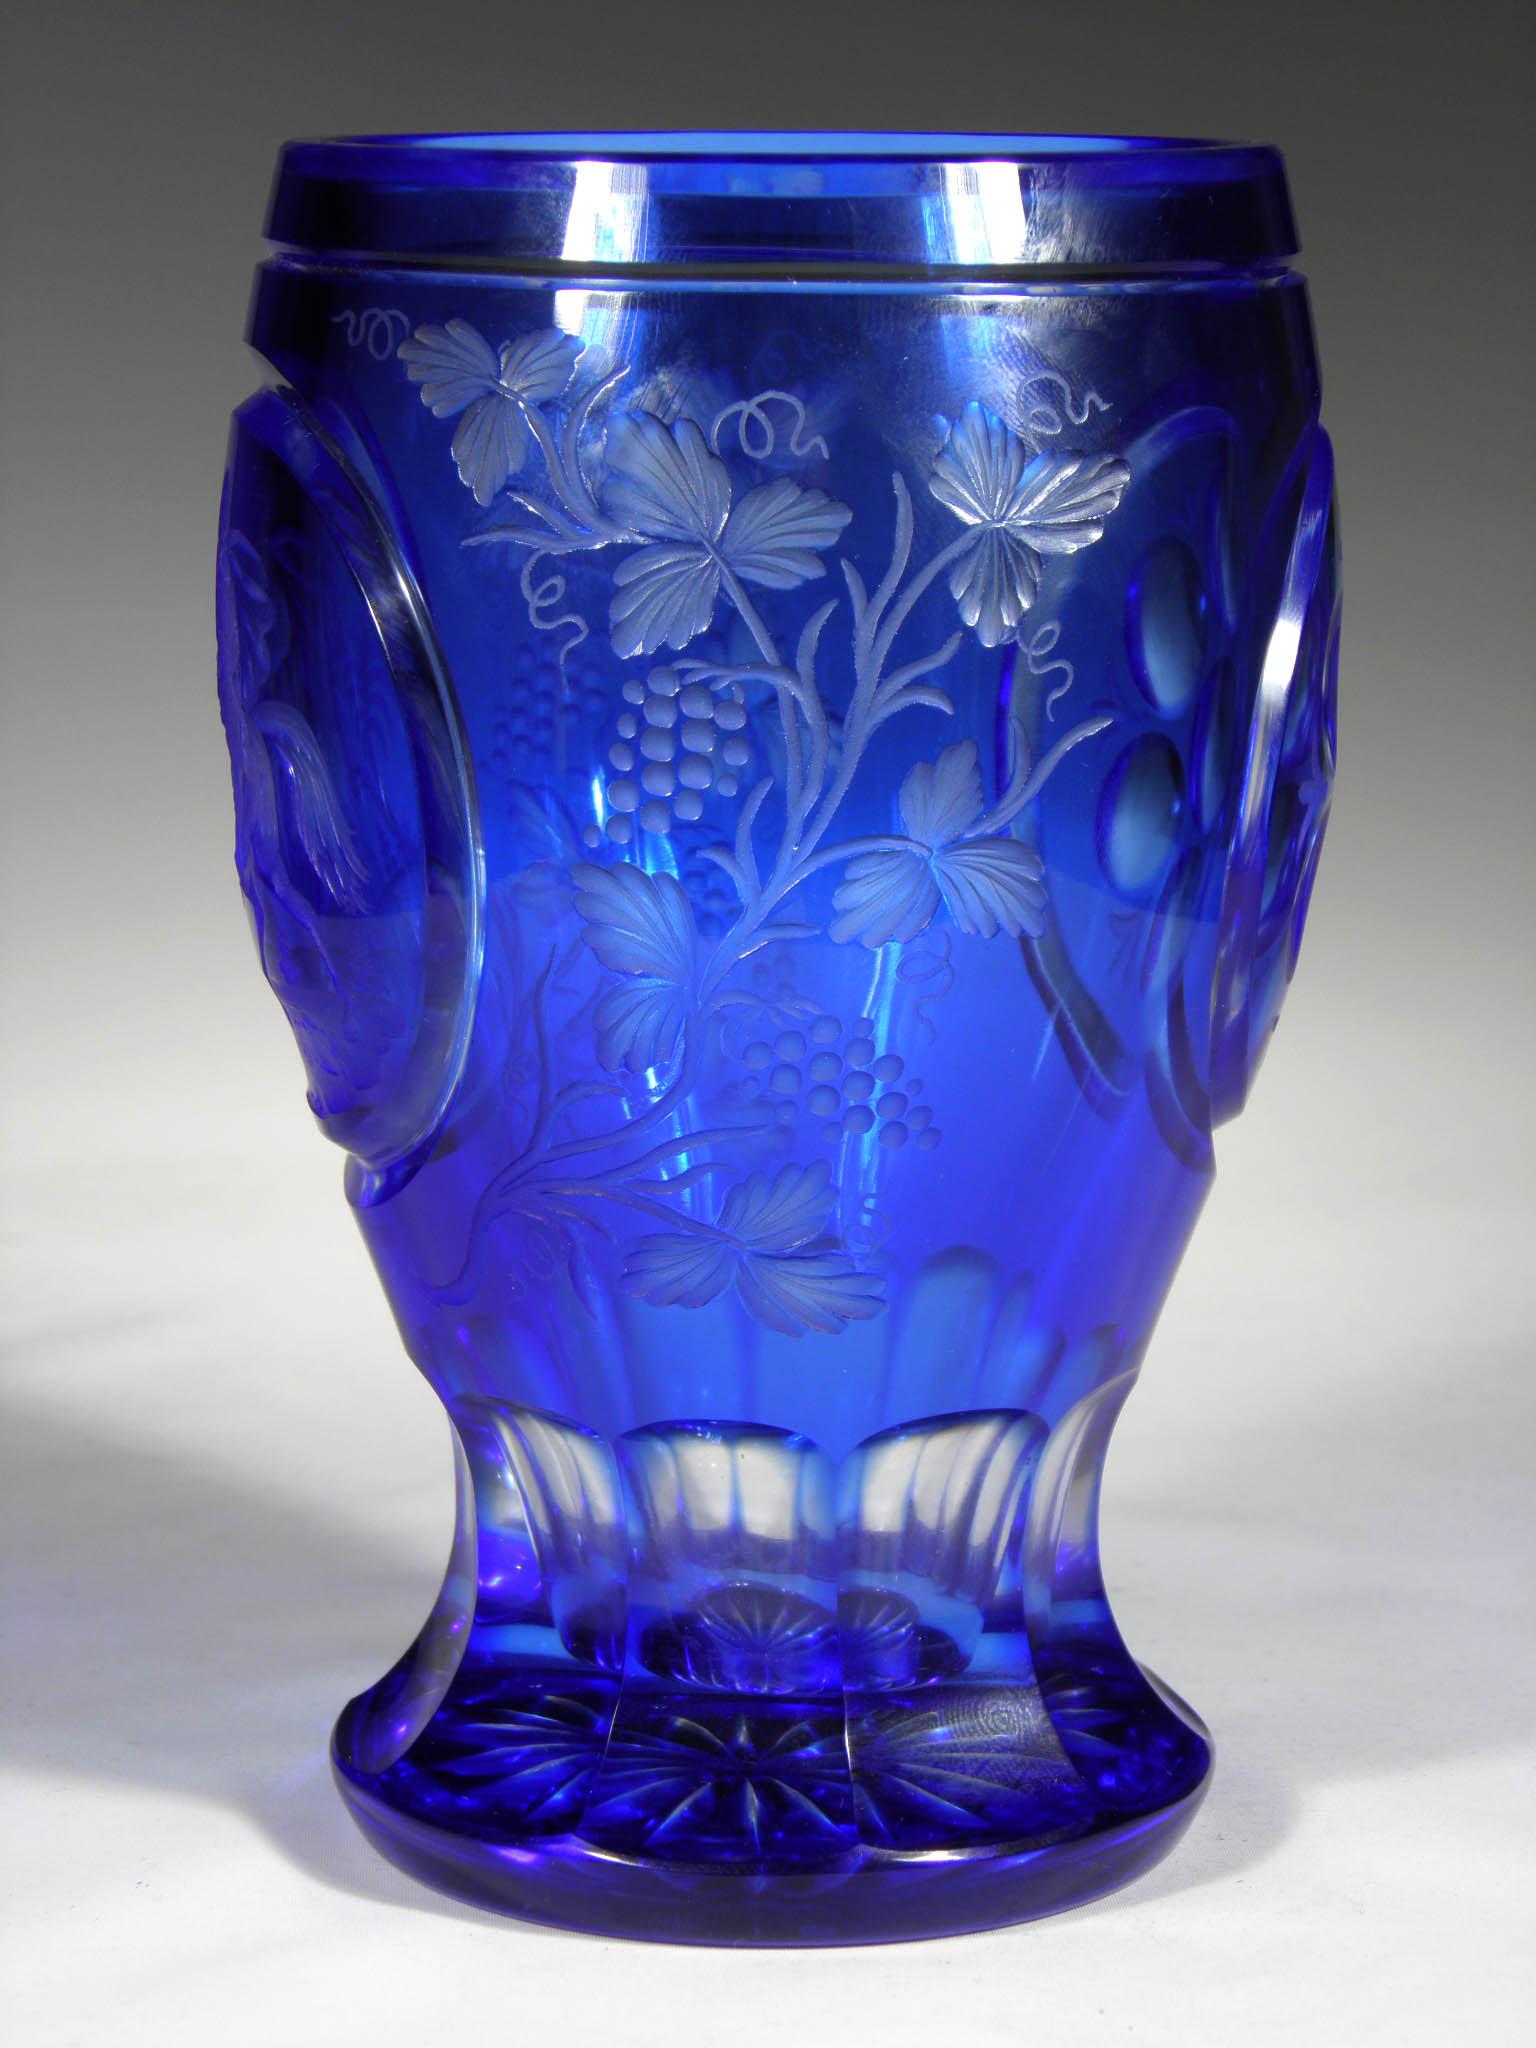 Antique Bohemian Overlaid Goblet with Mamelug motive from 20th Century.
Hand engraved.